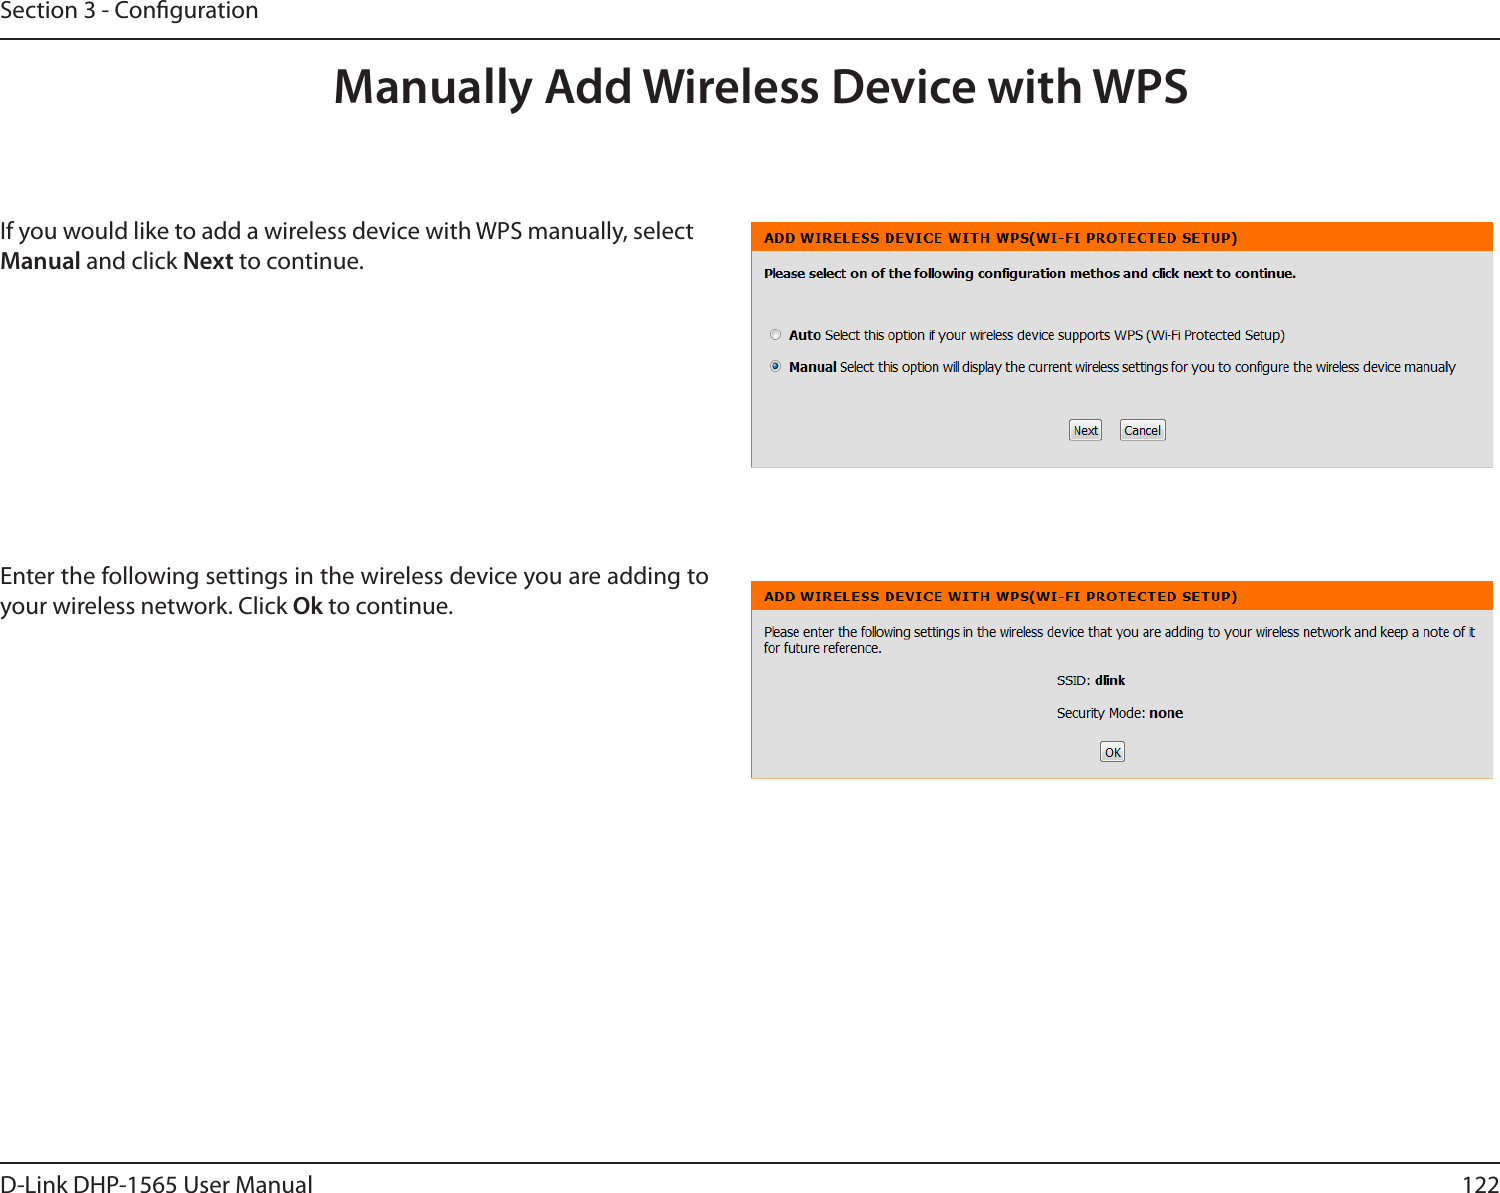 122D-Link DHP-1565 User ManualSection 3 - CongurationManually Add Wireless Device with WPSIf you would like to add a wireless device with WPS manually, select Manual and click Next to continue. Enter the following settings in the wireless device you are adding to your wireless network. Click Ok to continue. 